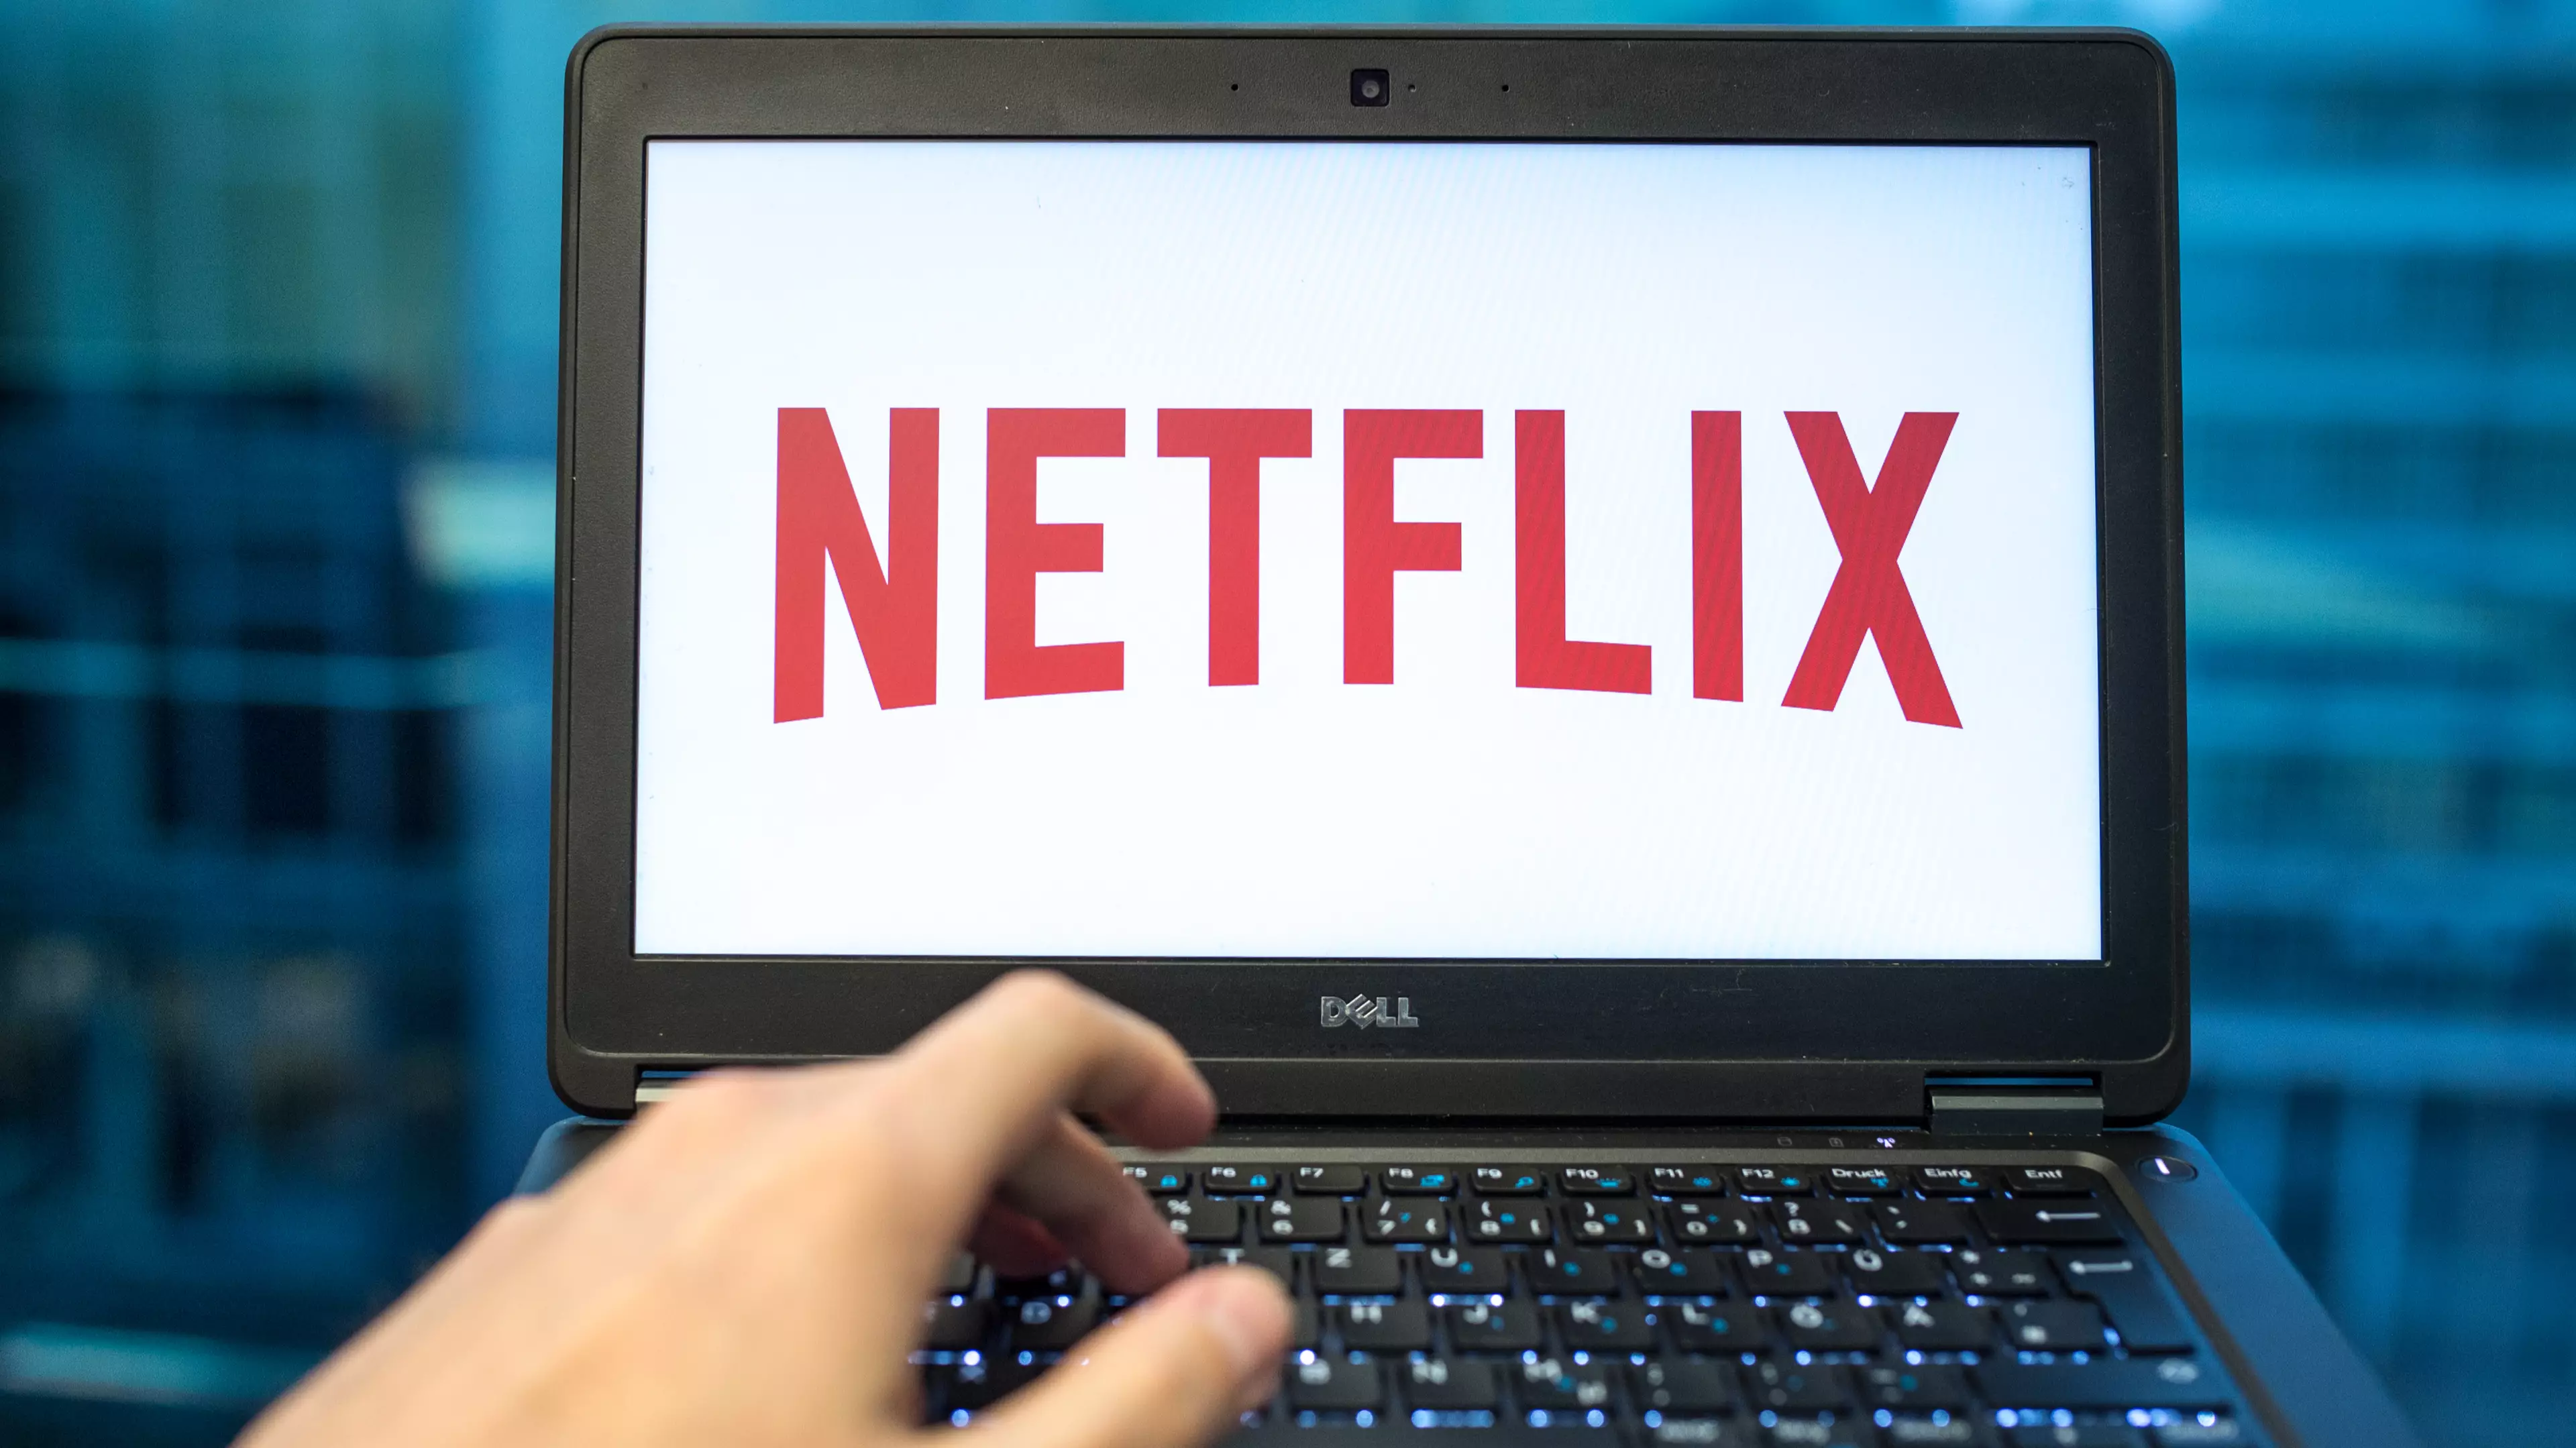 Netflix Is Introducing Adverts Between Episodes That Could Affect Your Binge-Watching